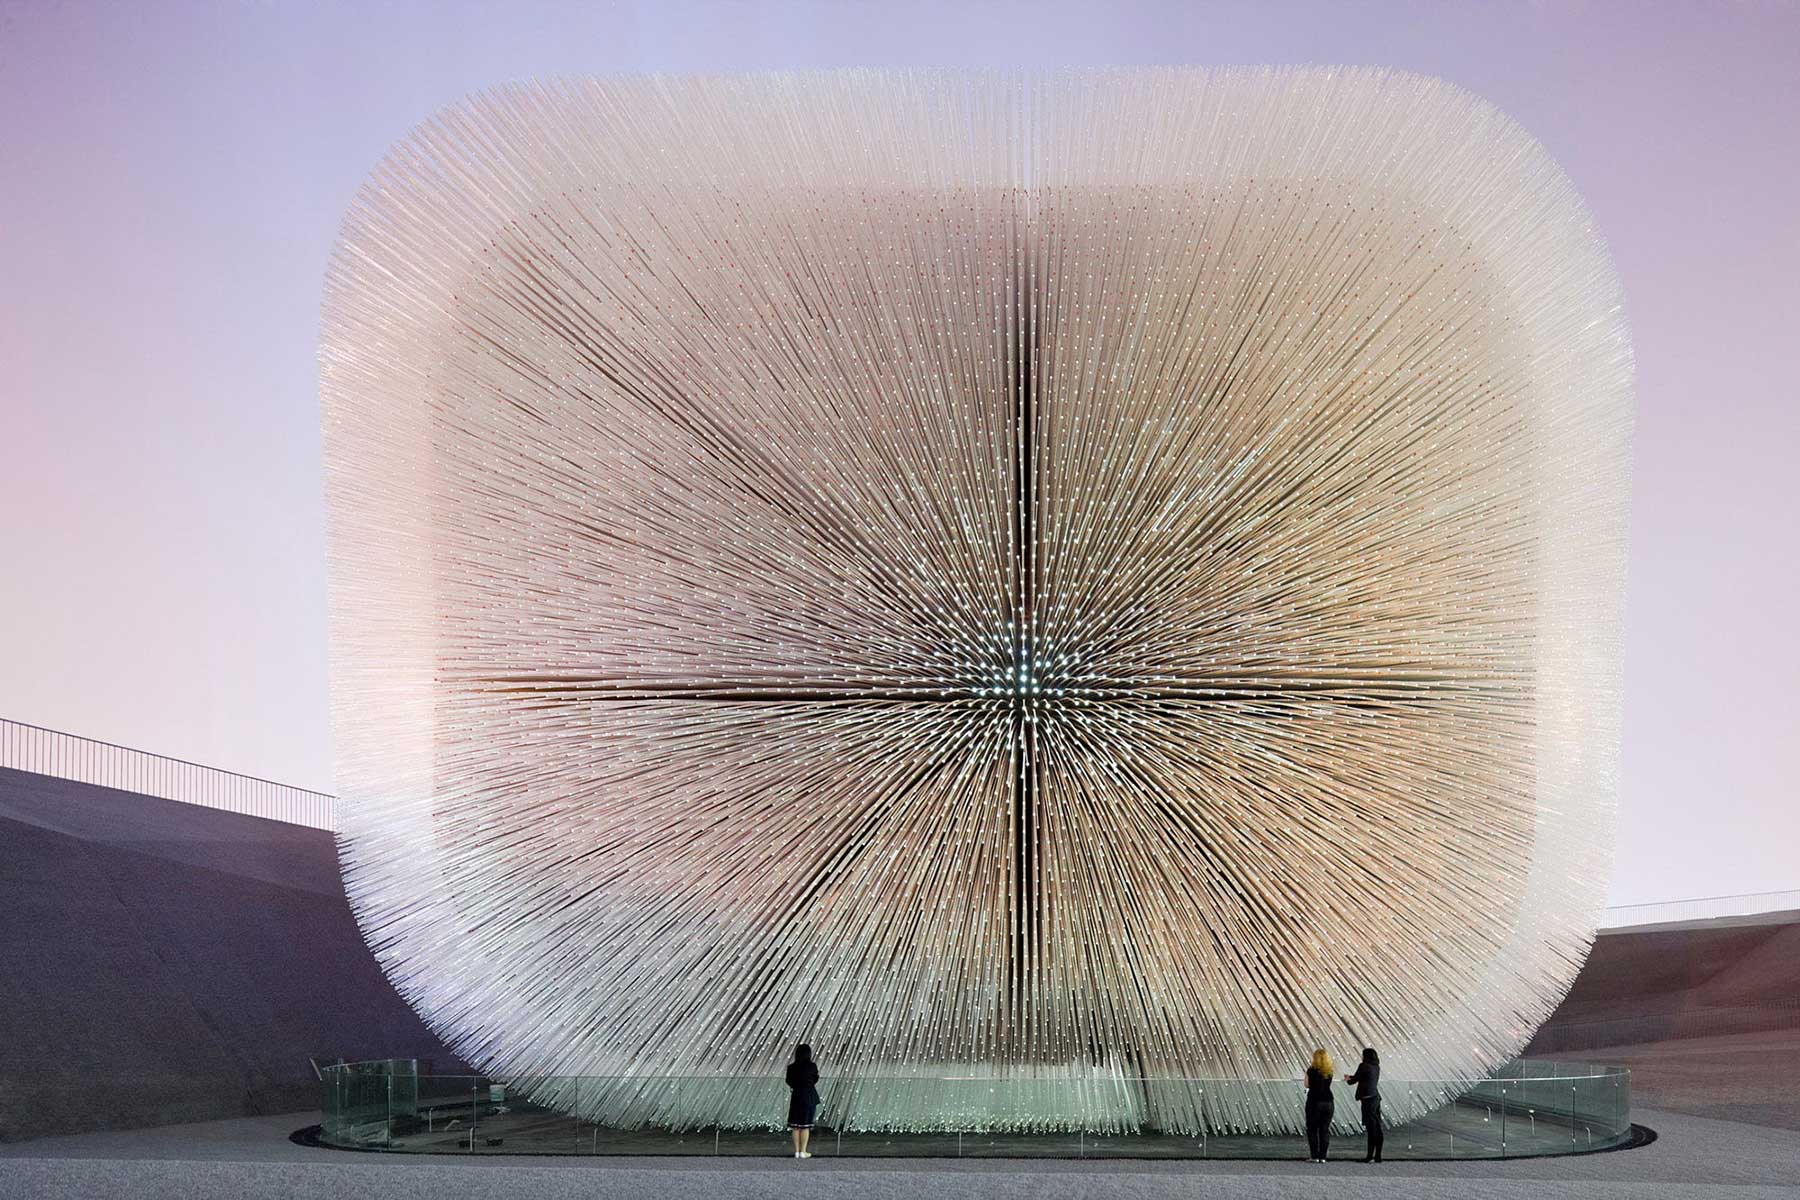 The UK pavilion at Expo 2010, colloquially known as the Seed Cathedral, was a sculpture structure built by a nine-member conglomeration of British business and government resources directed by designer Thomas Heatherwick. The Seed Cathedral is 20 meters in height, formed from 60,000 slender transparent fibre optic rods, each 7.5 metres long and each encasing one or more seeds at its tip. In its unique biomimetic design, during the day, they draw daylight inwards to illuminate the interior. At night, light sources inside each rod allow the whole structure to glow. As the wind moves past, the building and its optic “hairs” gently move to create a dynamic effect.